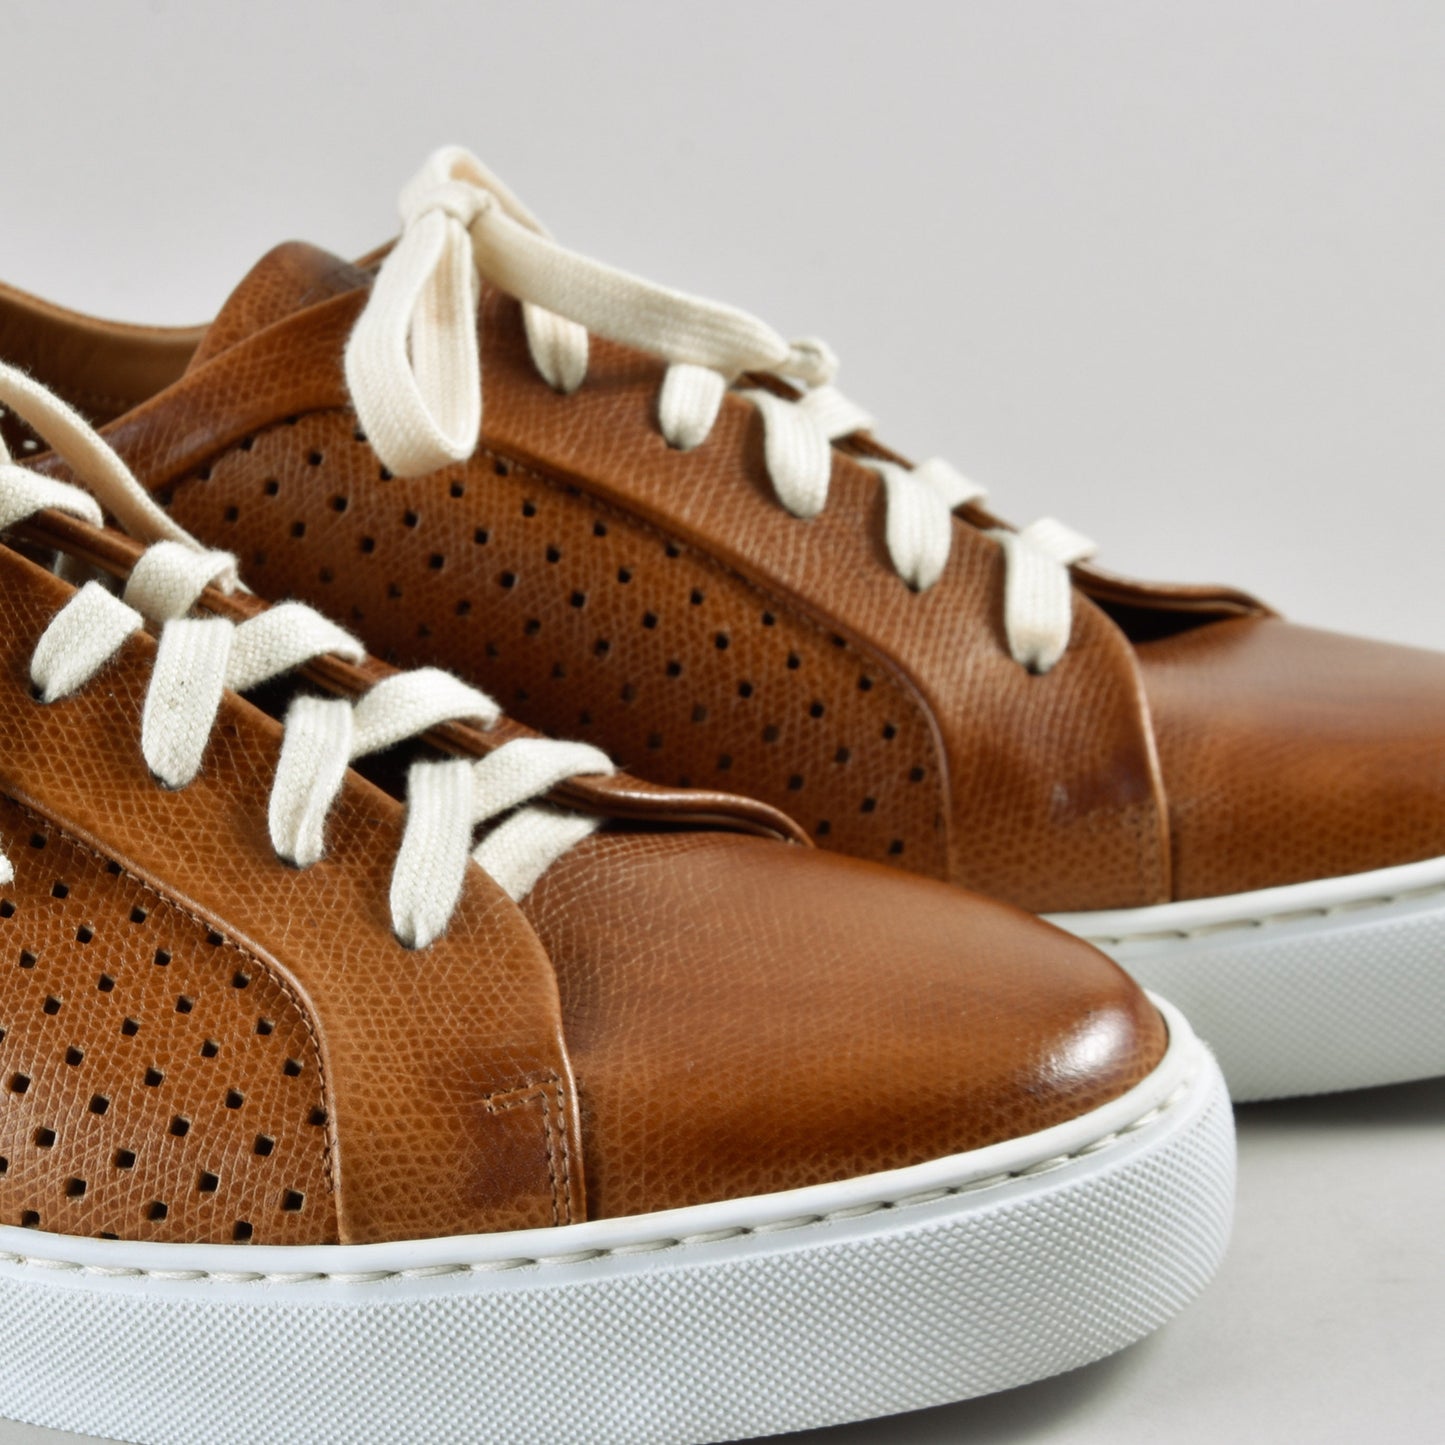 Sneakers in perforated leather